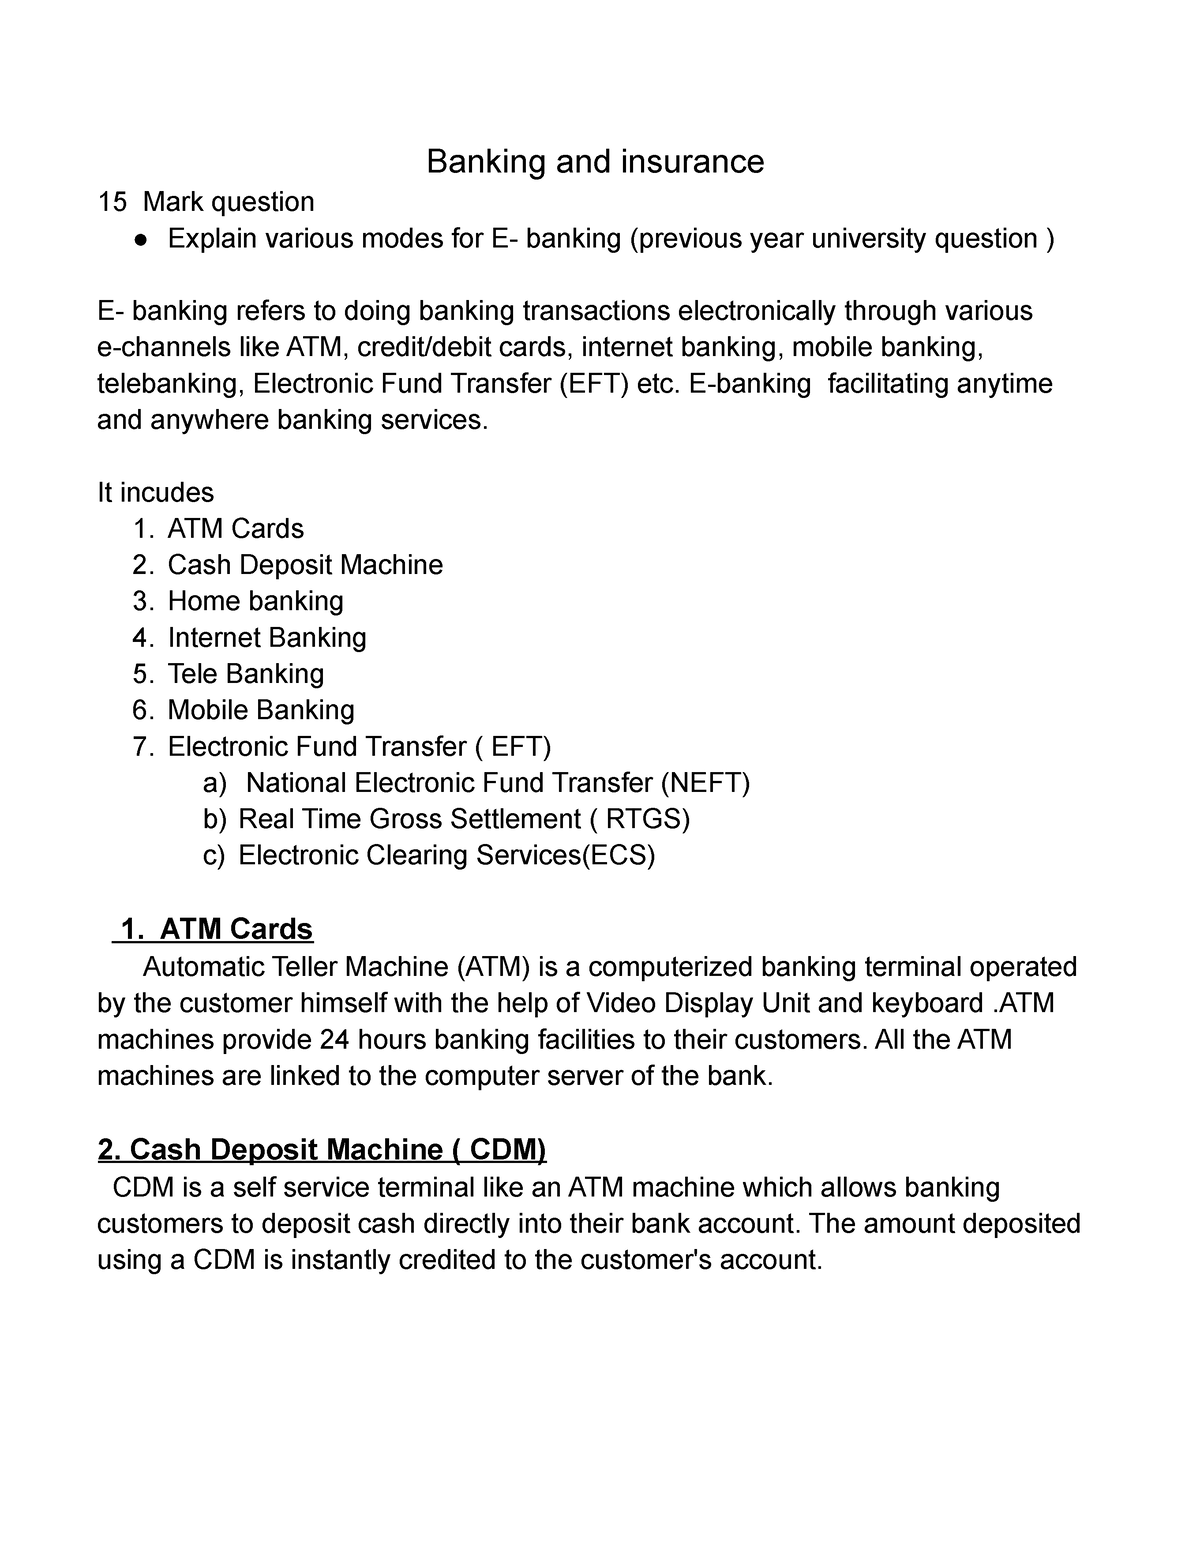 write an essay on banking system